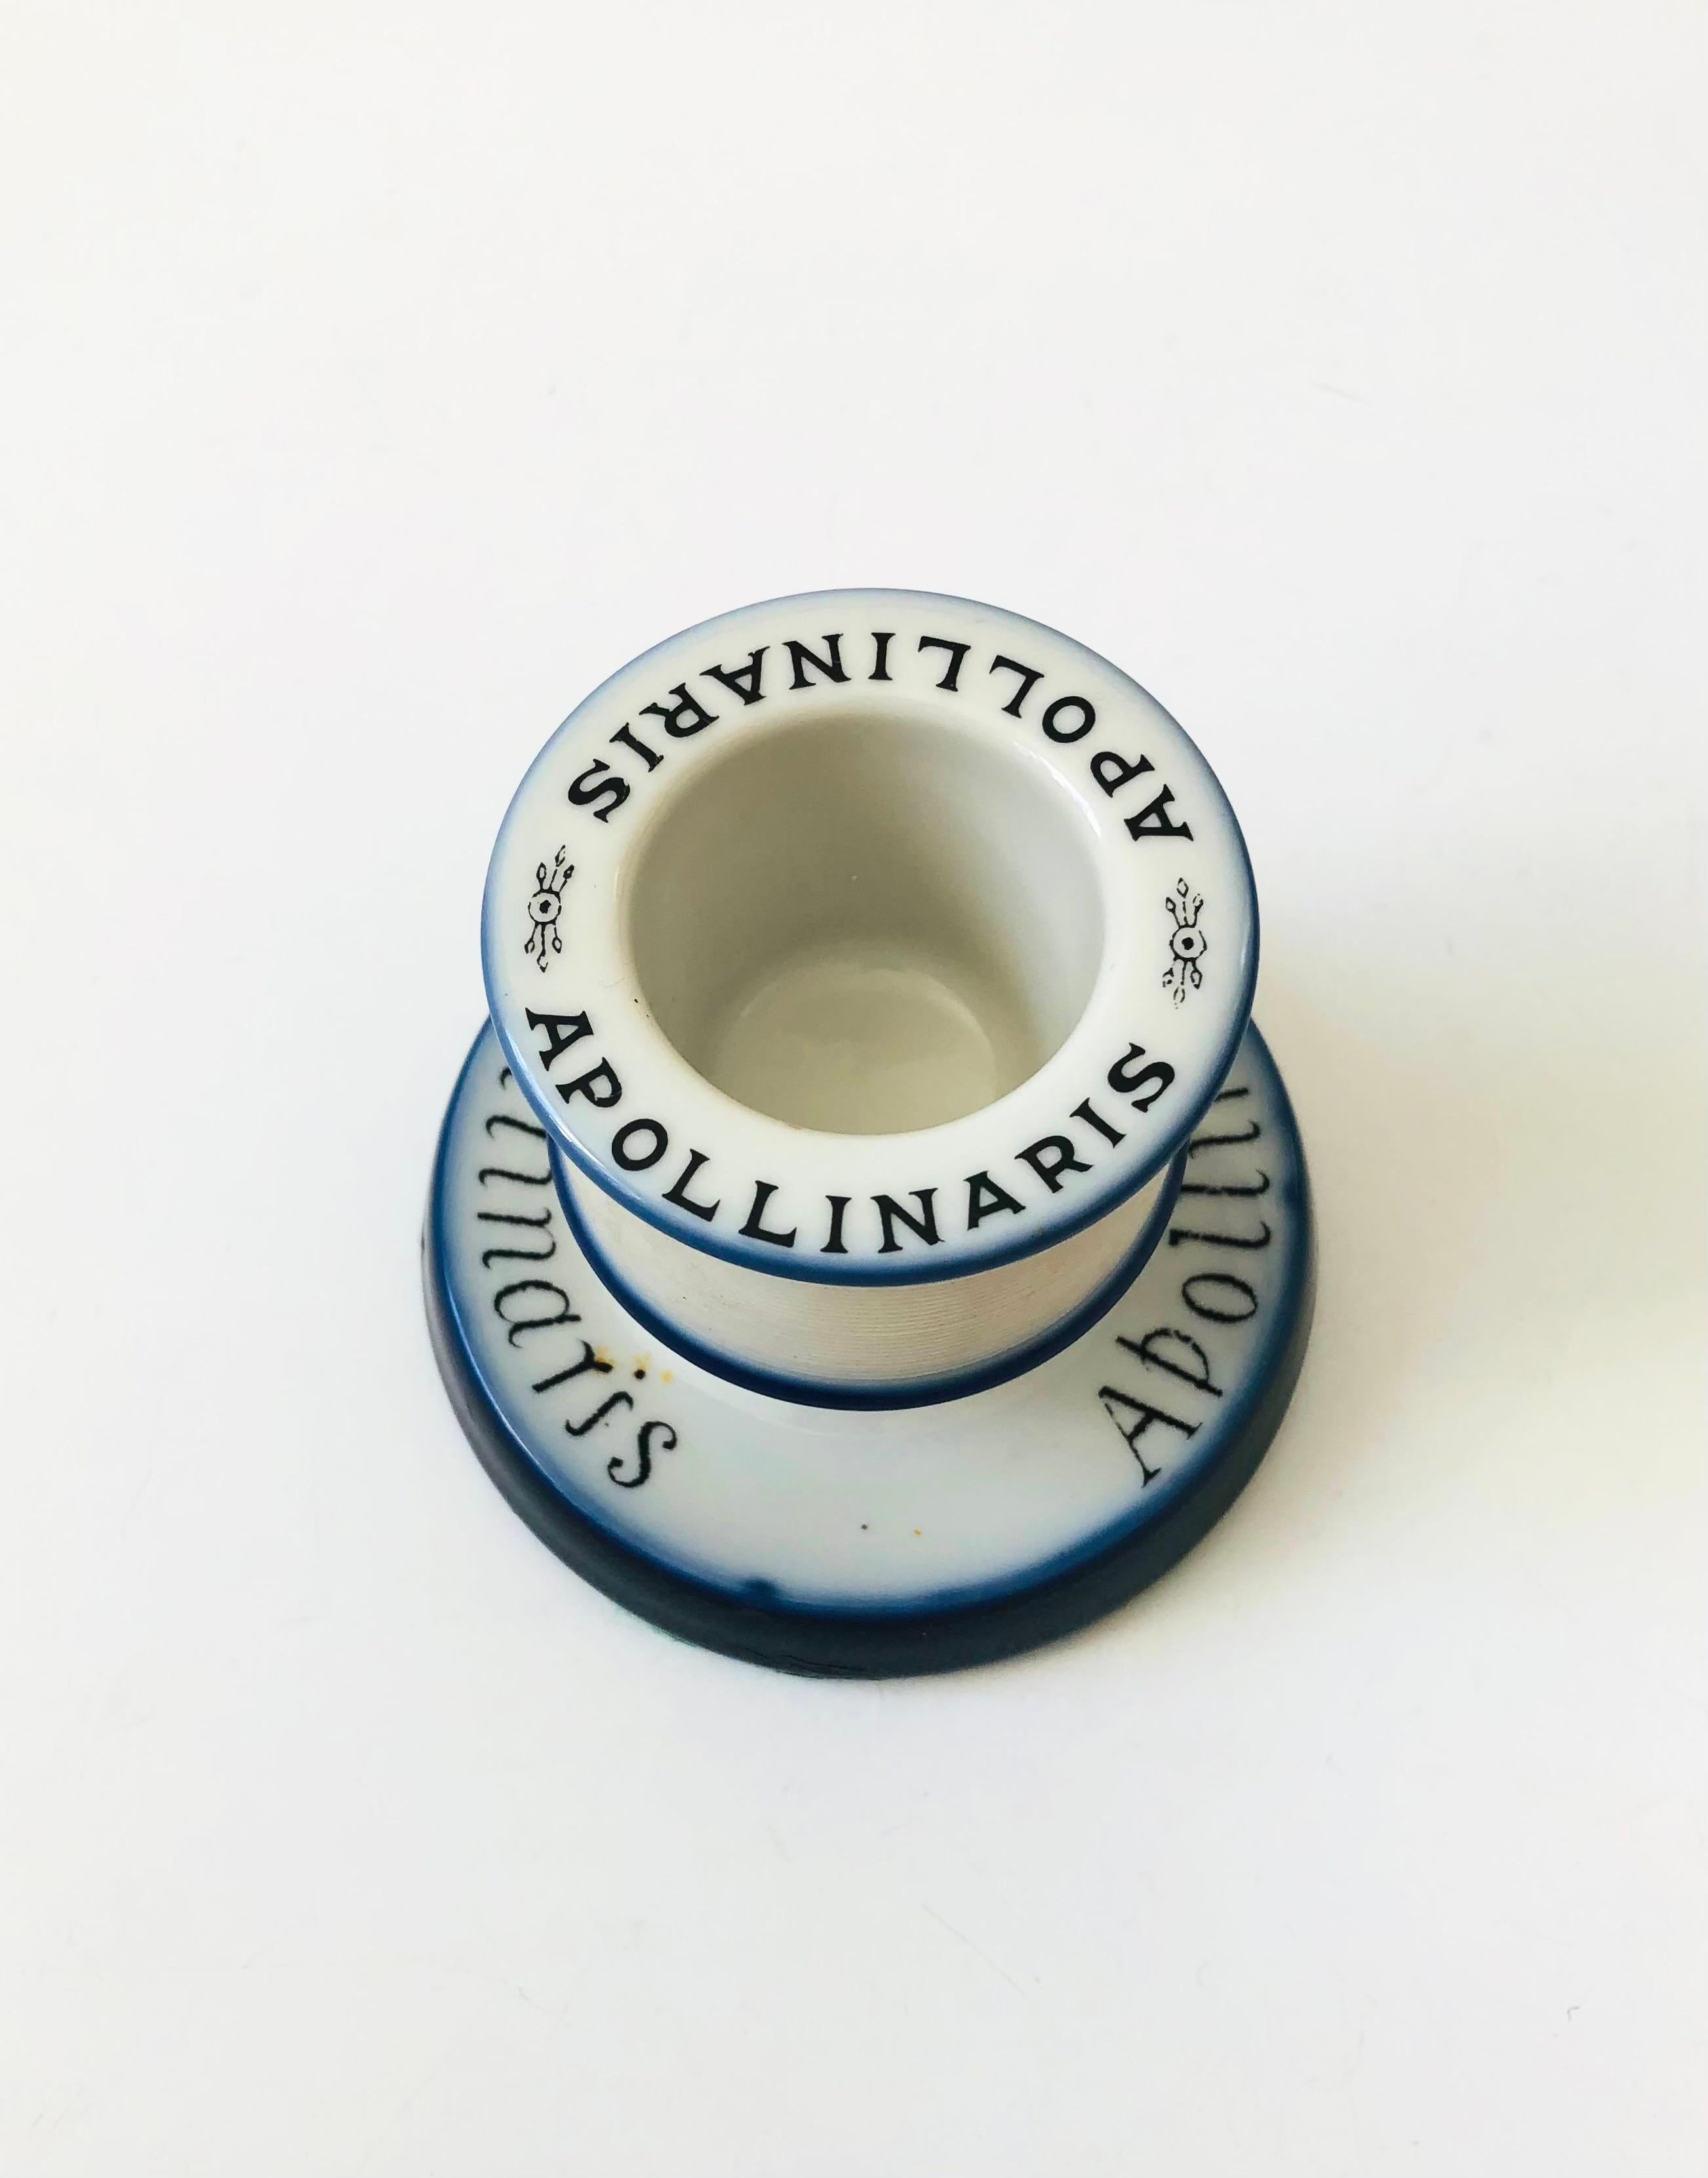 A vintage ceramic match striker and holder advertising Apollinaris Mineral Water. Features a compartment for holding matches with a ribbed texture to the ceramic for using as a striker. Glossy white glaze with cobalt blue banding. Produced in